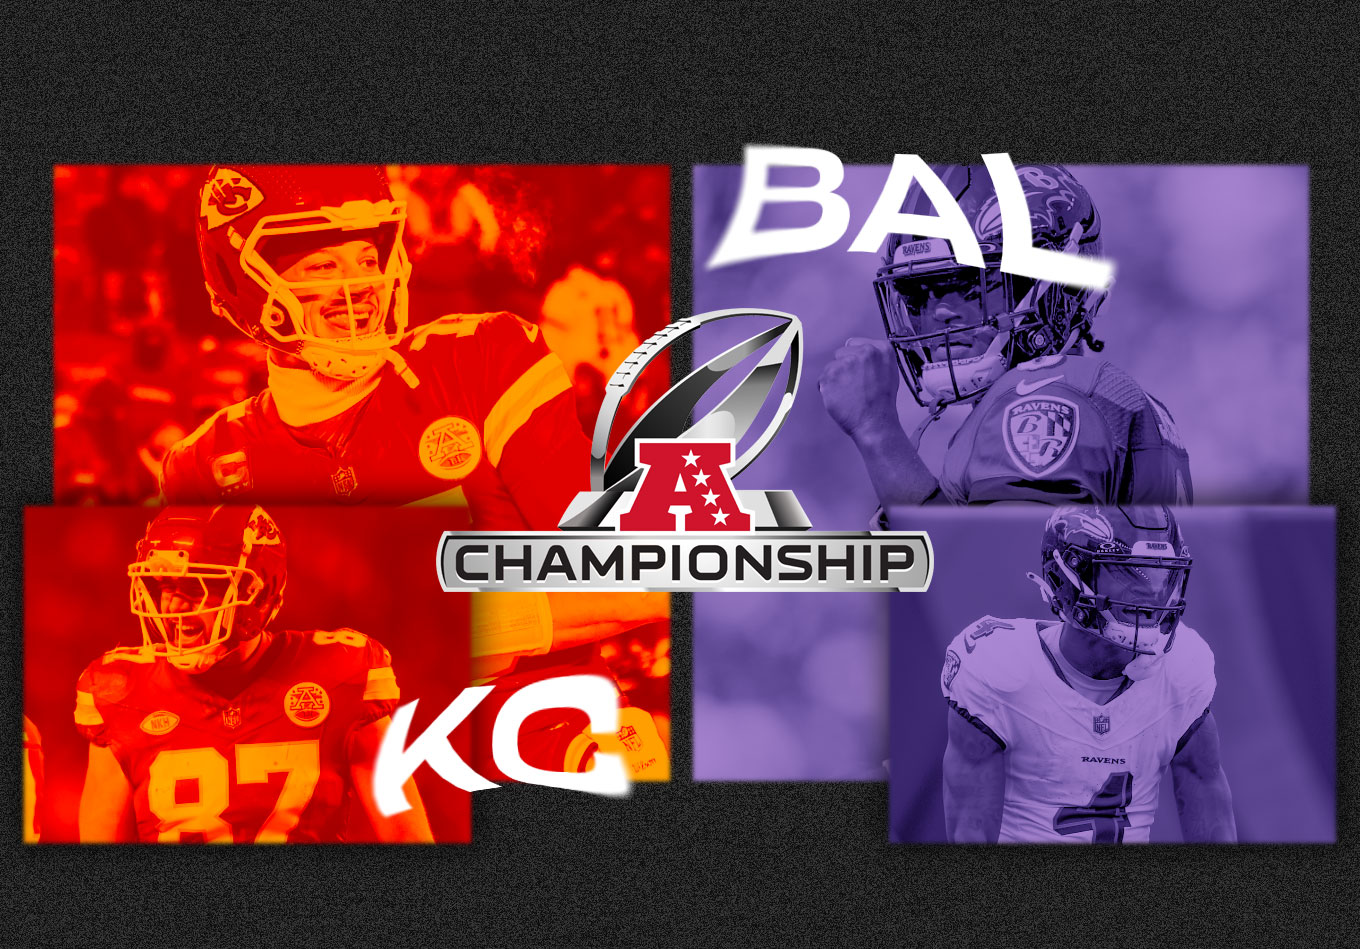 Chiefs vs Ravens Prediction: Is This Lamar’s Moment, or Will Kansas City Rise Again in the AFC Championship?